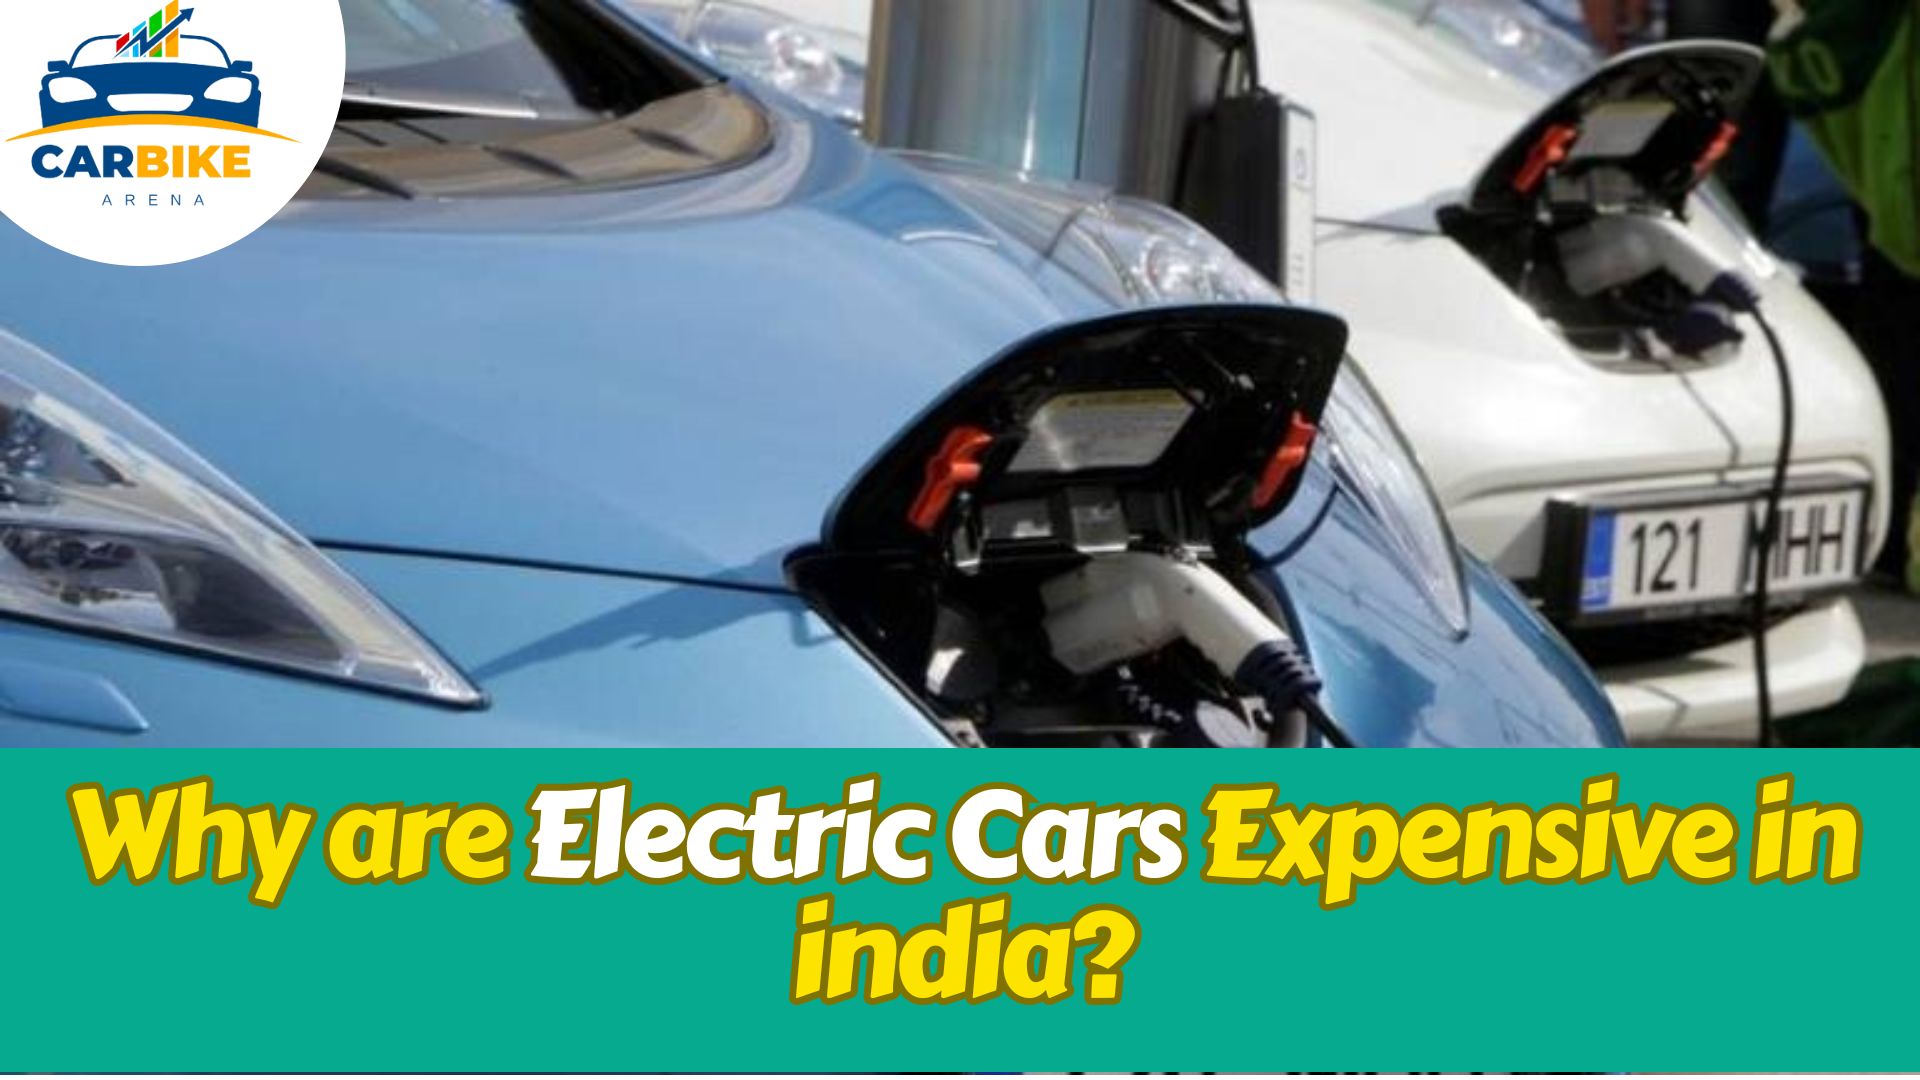 Why are Electric Cars Expensive in India?